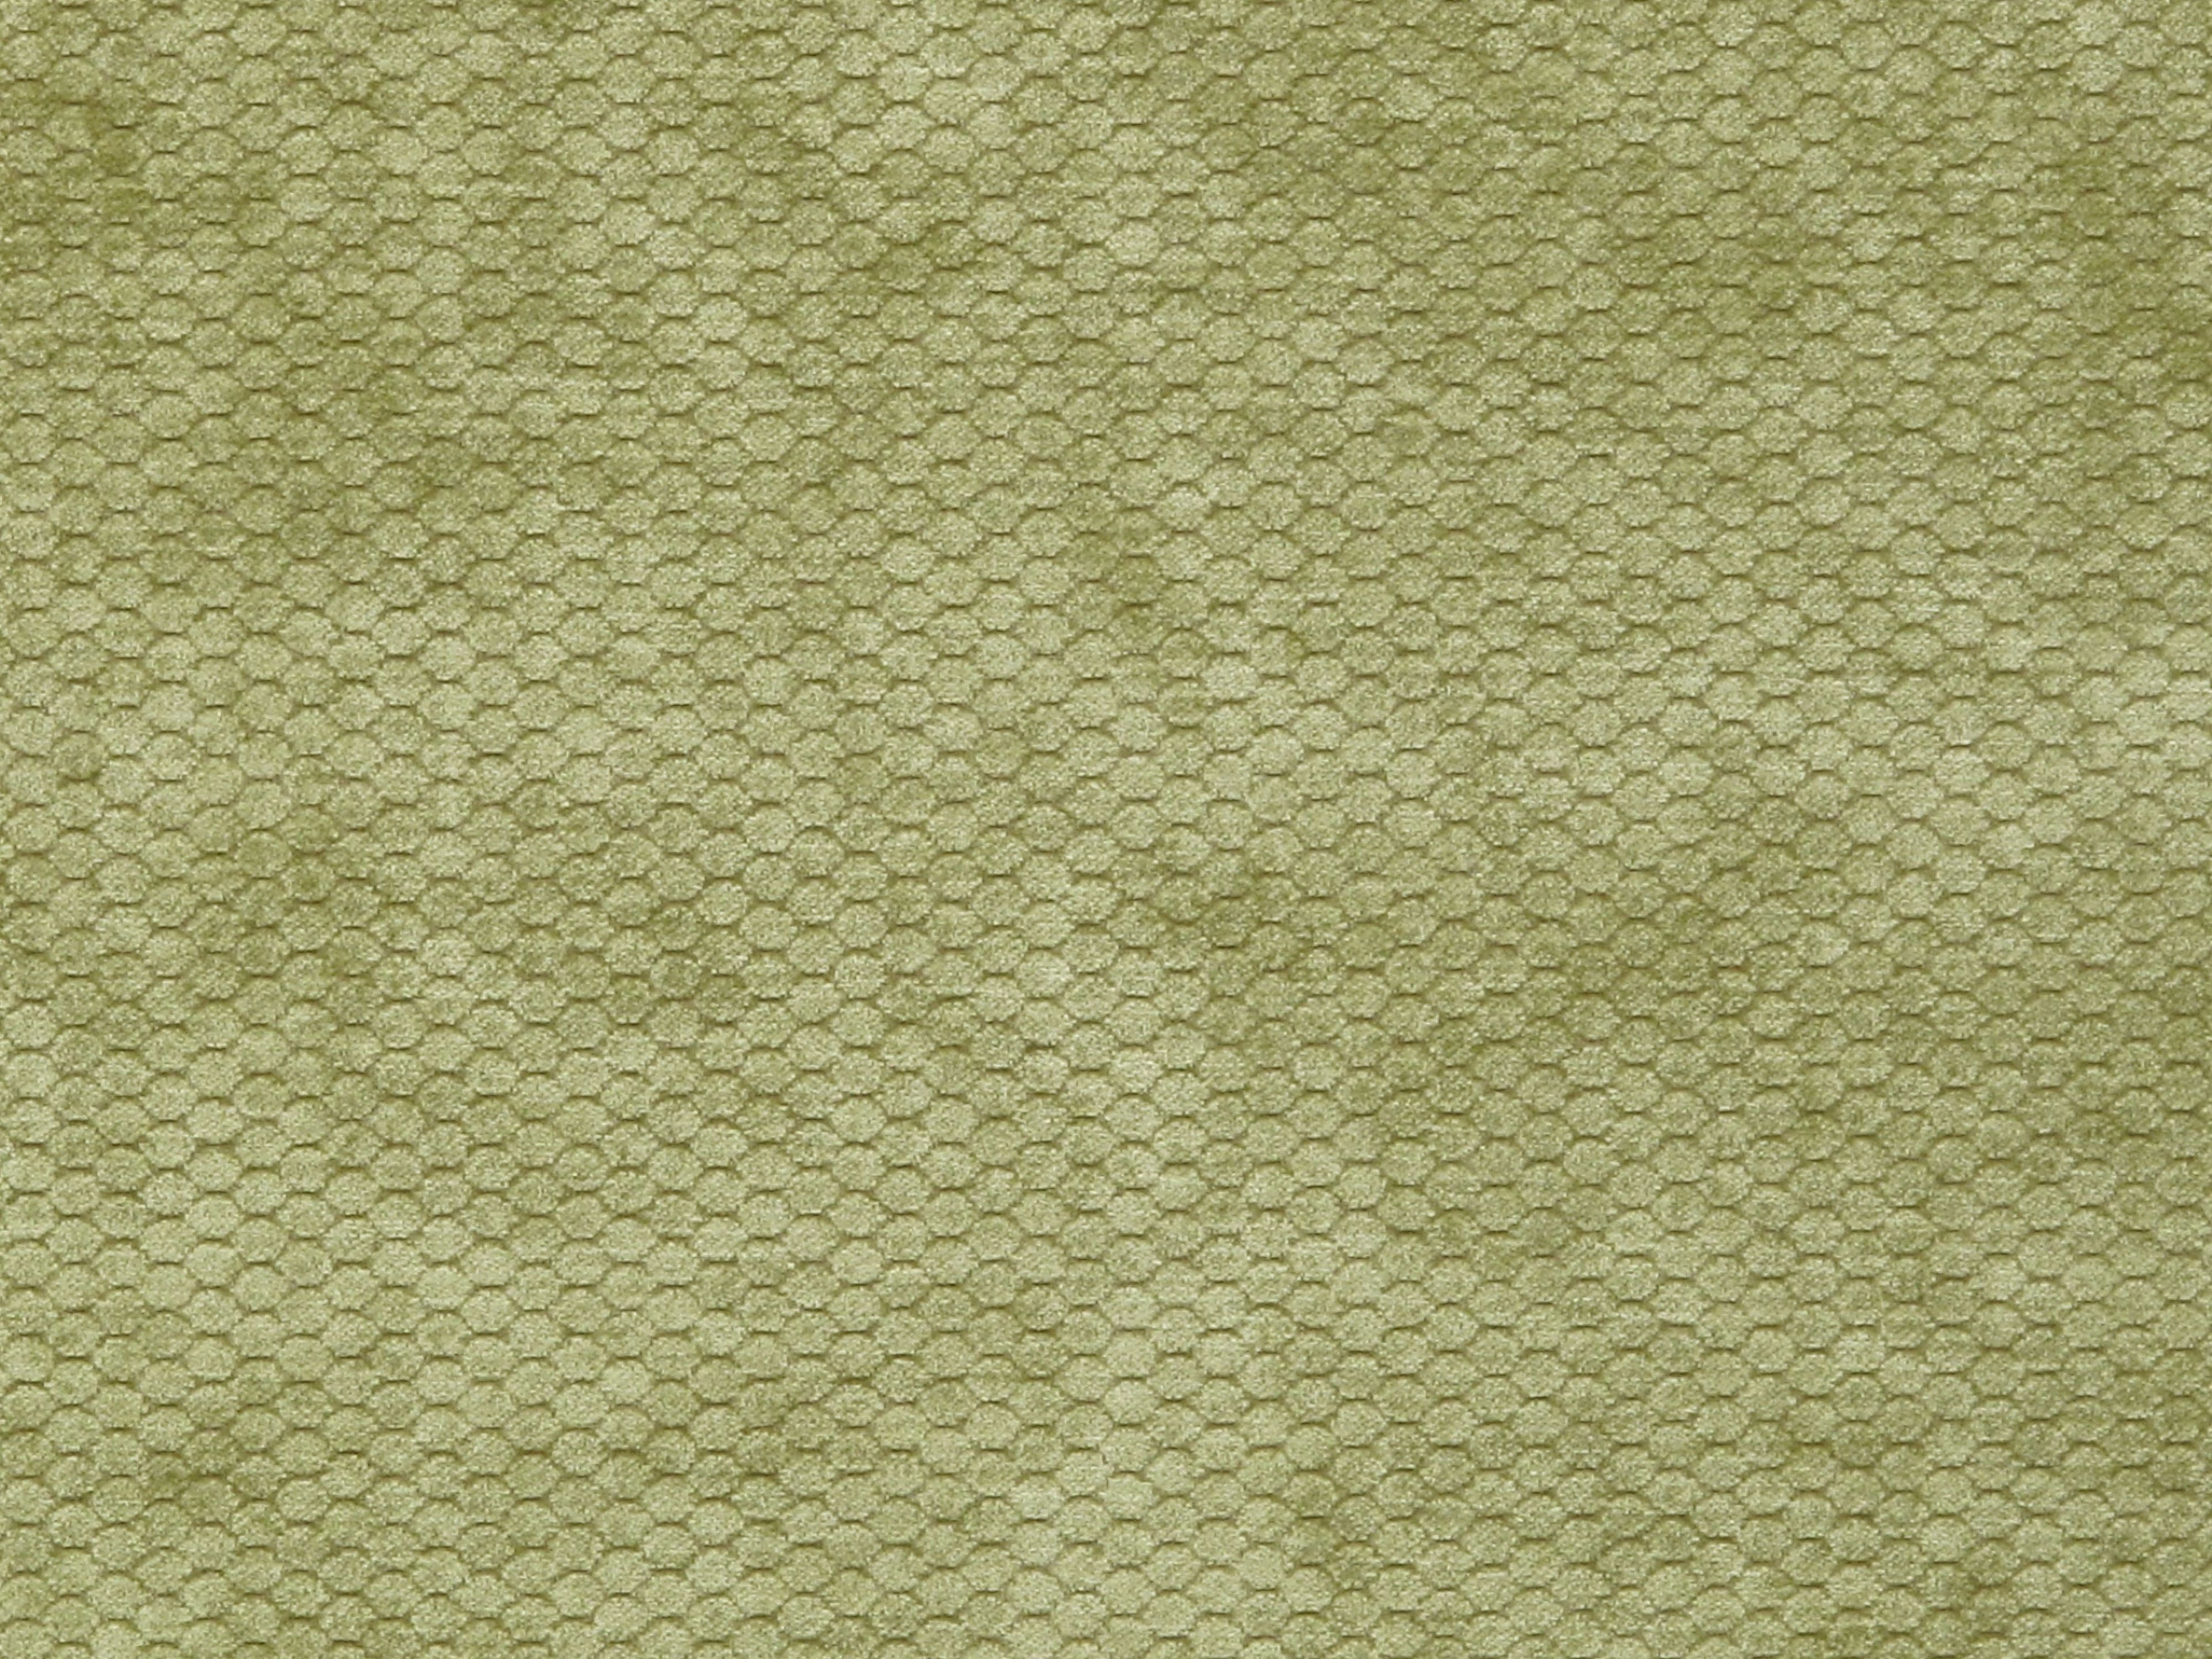 Monterosso fabric in moss color - pattern number FO 0003ZIP1 - by Scalamandre in the Old World Weavers collection